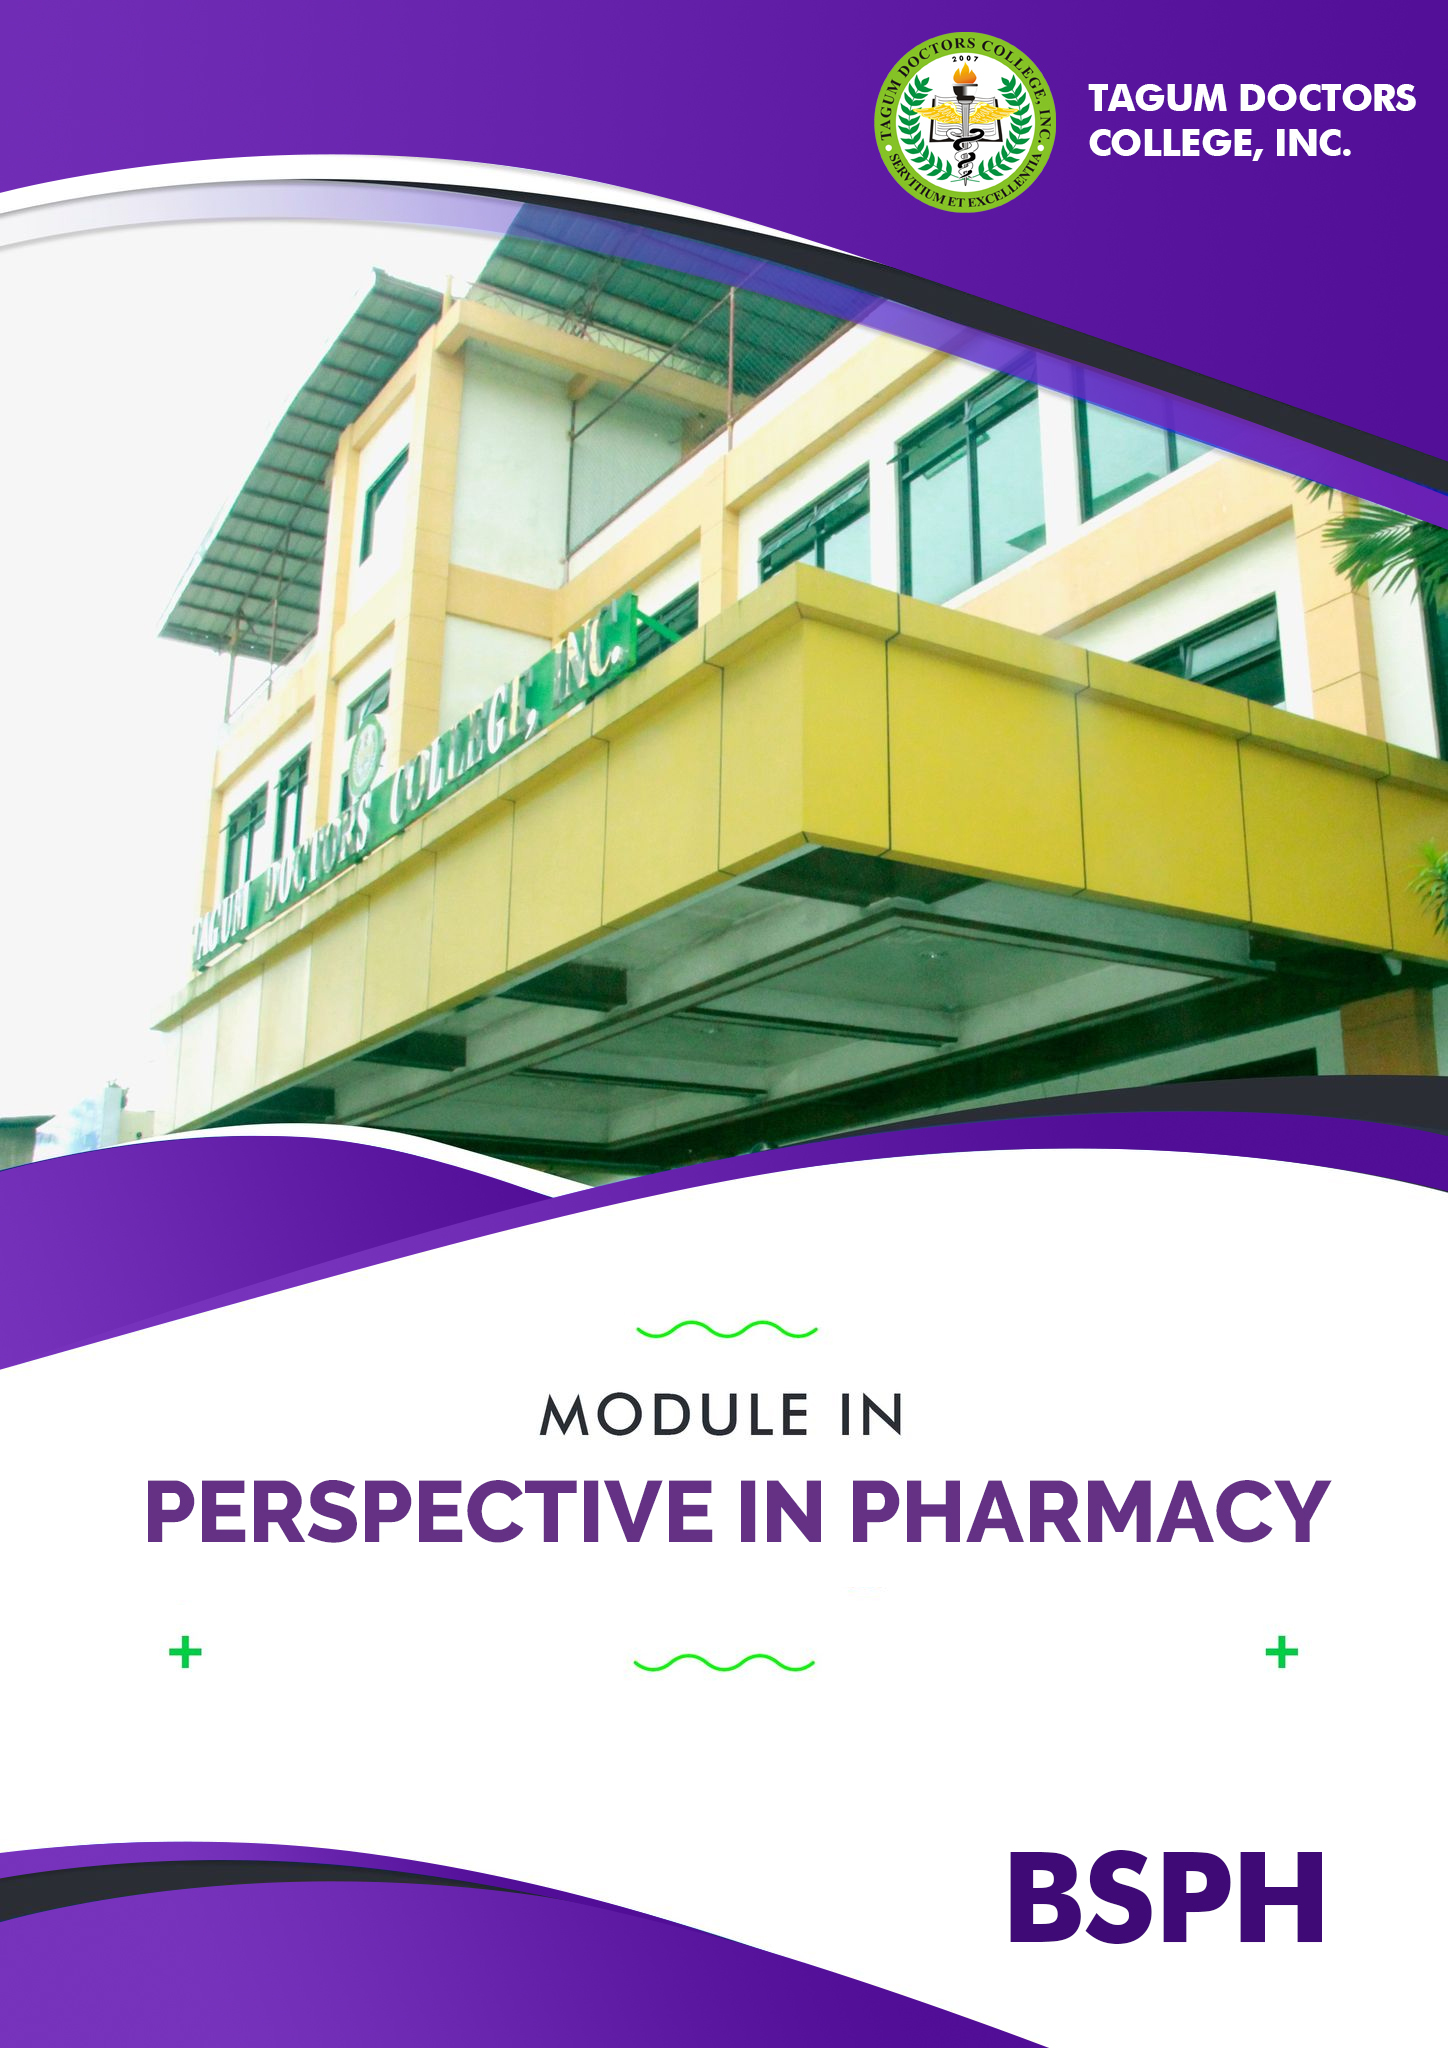 Perspectives in Pharmacy - BSPh 1C